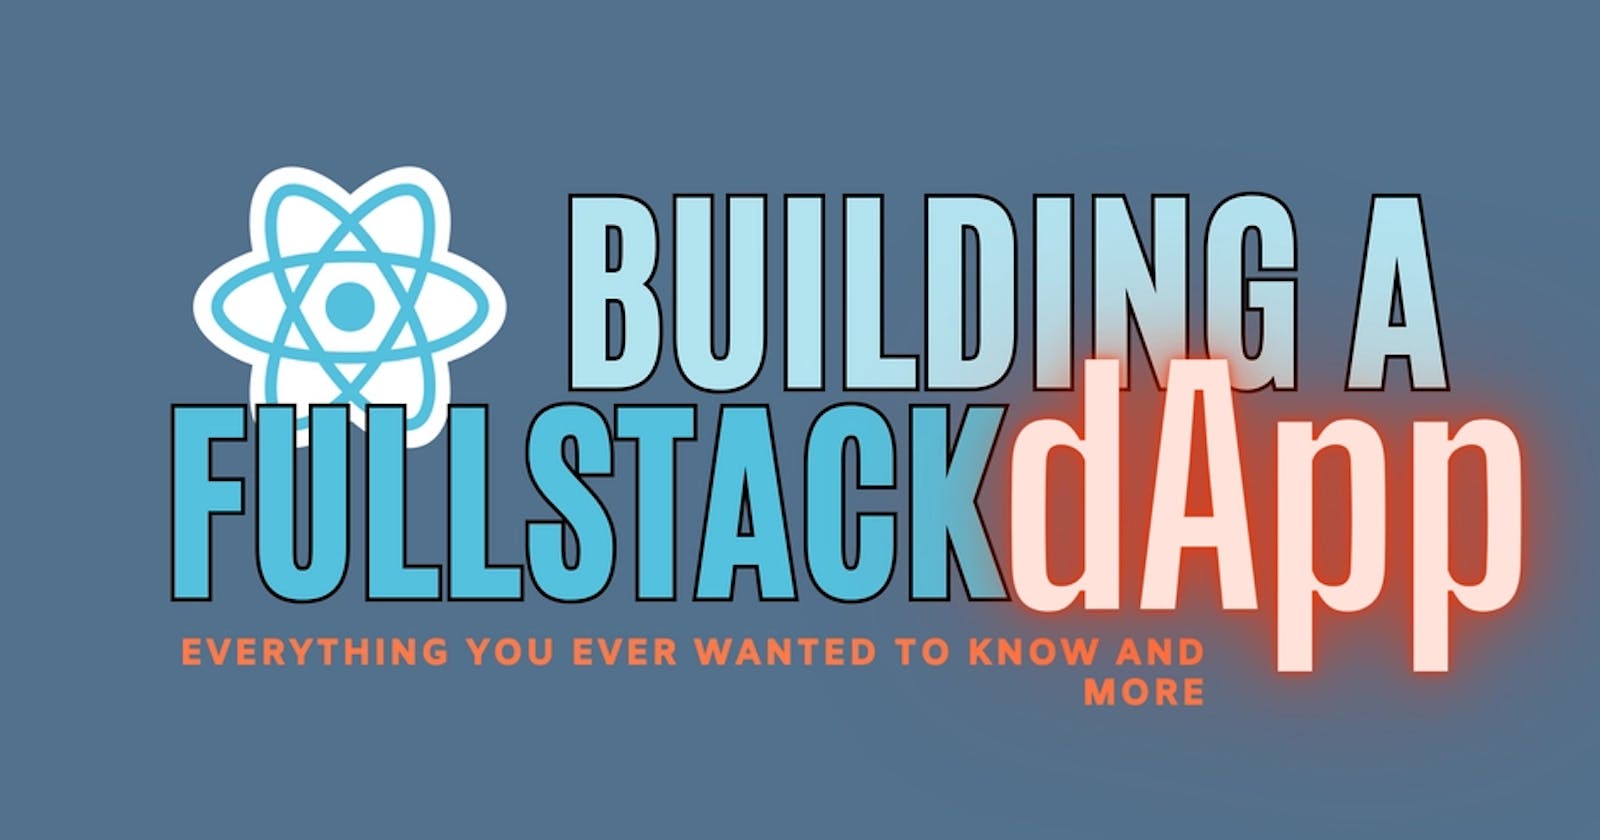 The Complete Guide To Building A FullStack dApp.